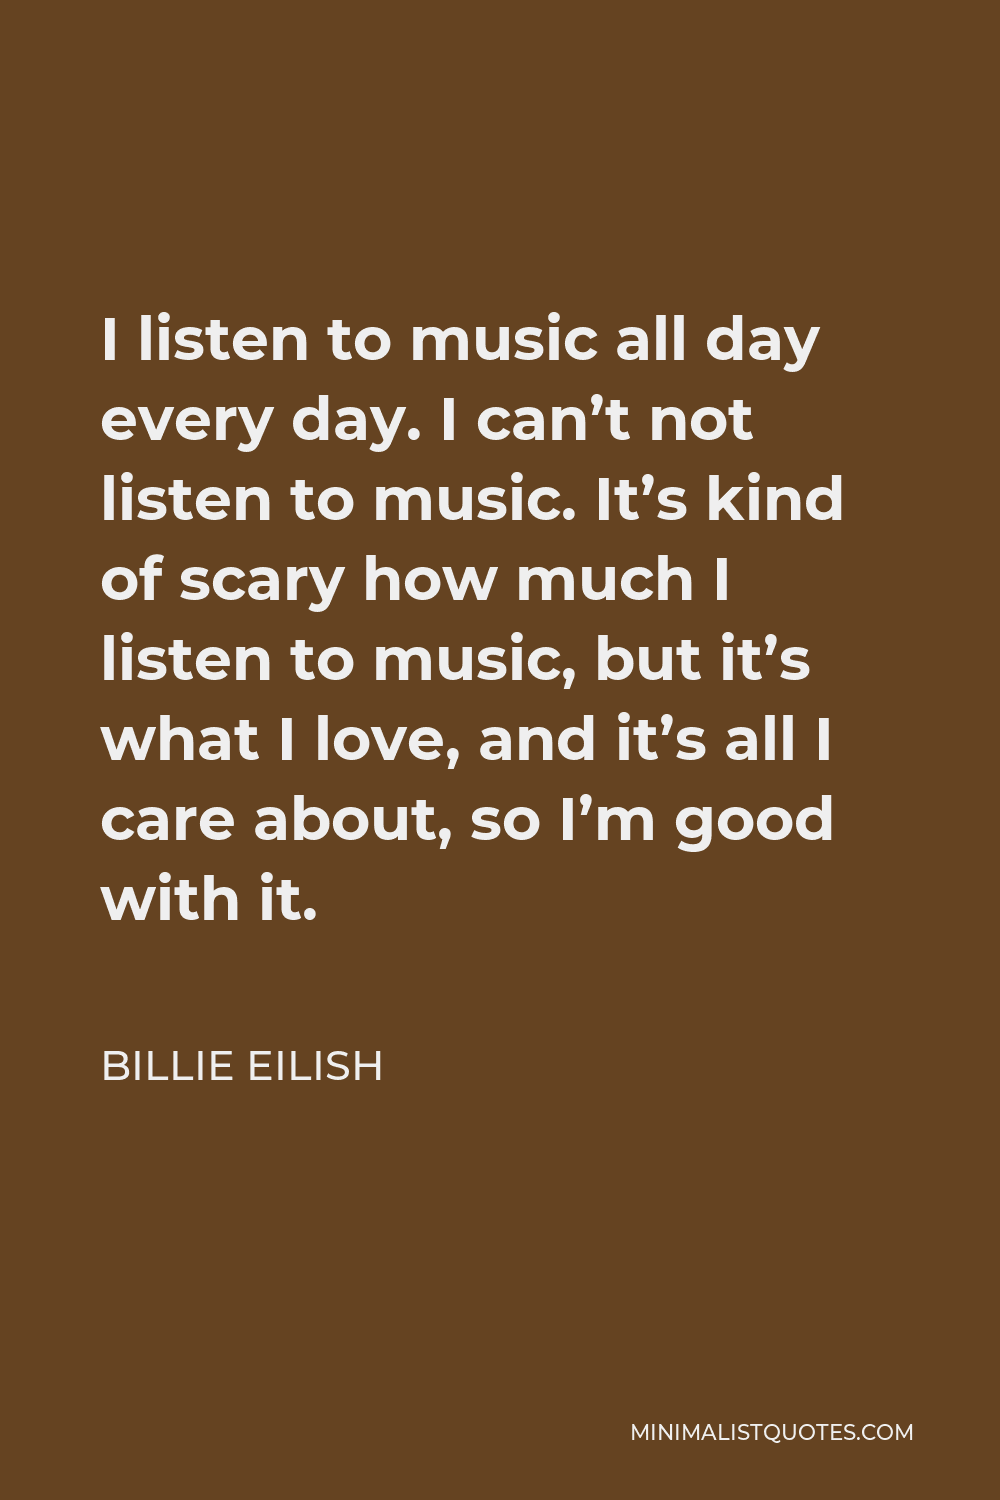 Billie Eilish Quote - I listen to music all day every day. I can’t not listen to music. It’s kind of scary how much I listen to music, but it’s what I love, and it’s all I care about, so I’m good with it.